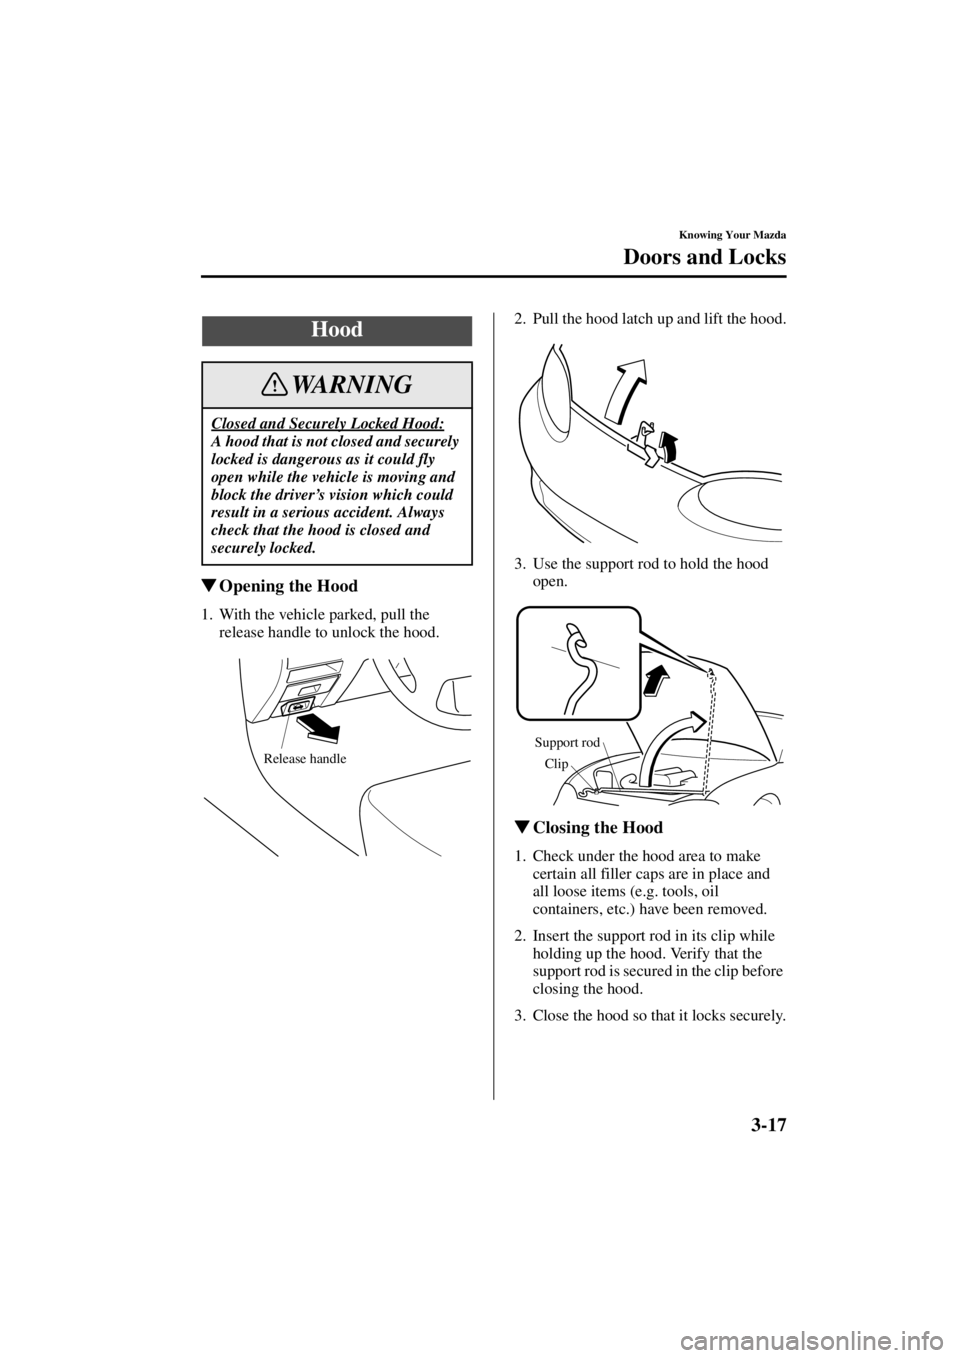 MAZDA MODEL SPEED MX-5 MIATA 2004  Owners Manual 3-17
Knowing Your Mazda
Doors and Locks
Form No. 8T02-EA-03L
Opening the Hood
1. With the vehicle parked, pull the 
release handle to unlock the hood. 2. Pull the hood latch up and lift the hood.
3. 